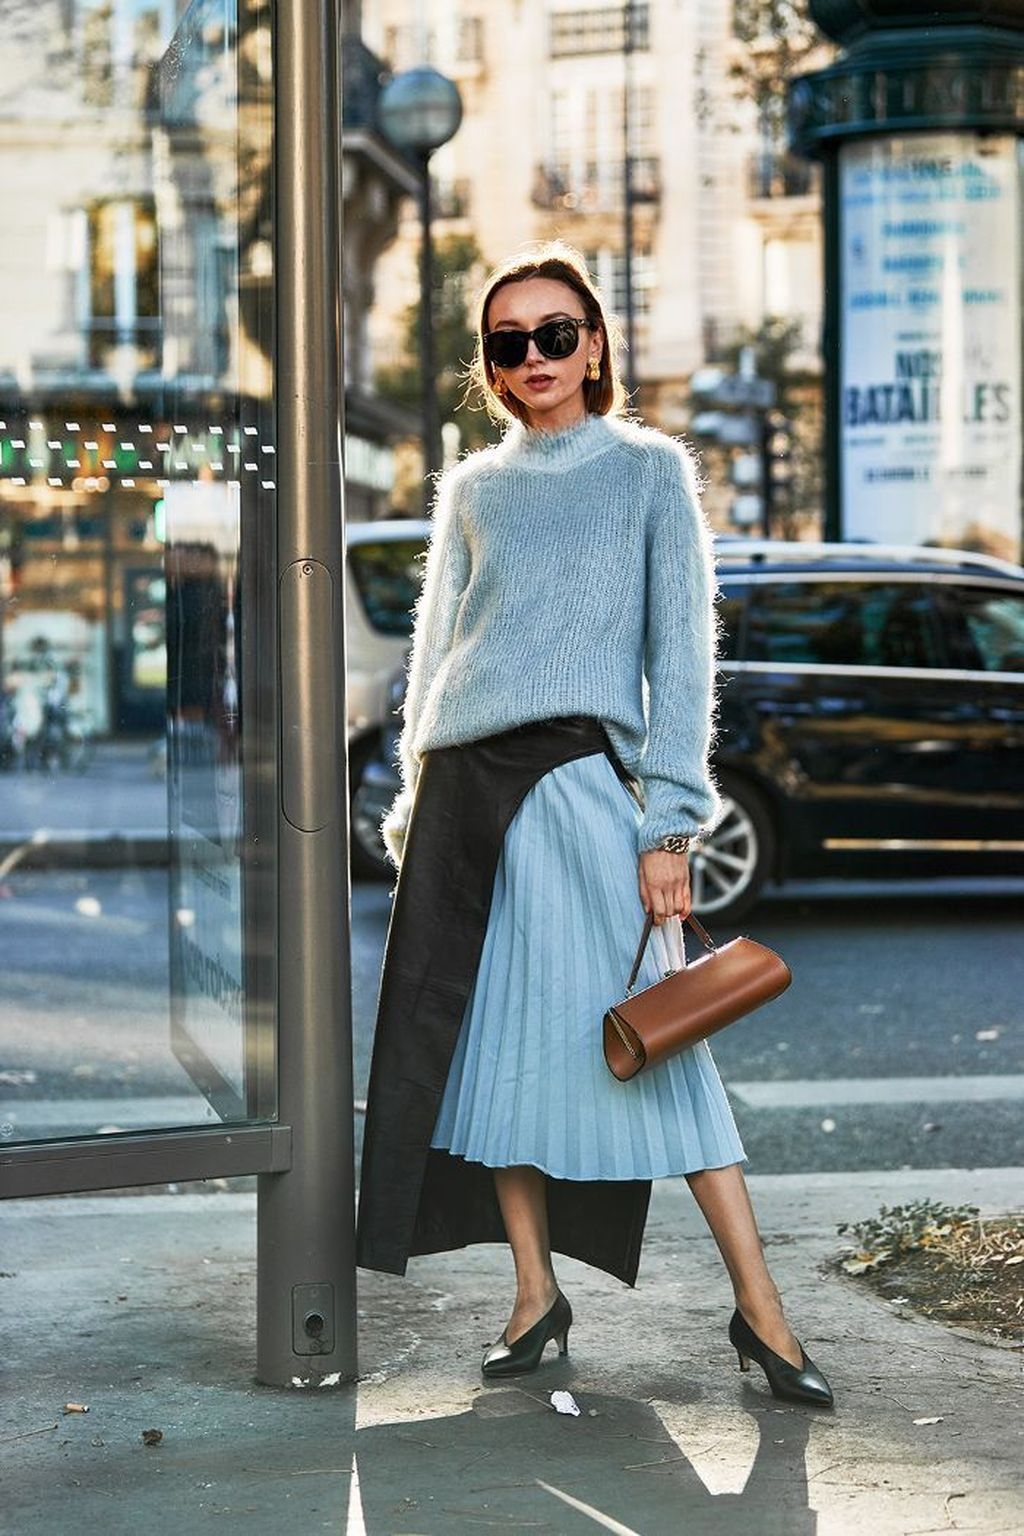 37 Cool Street Style Outfits Ideas